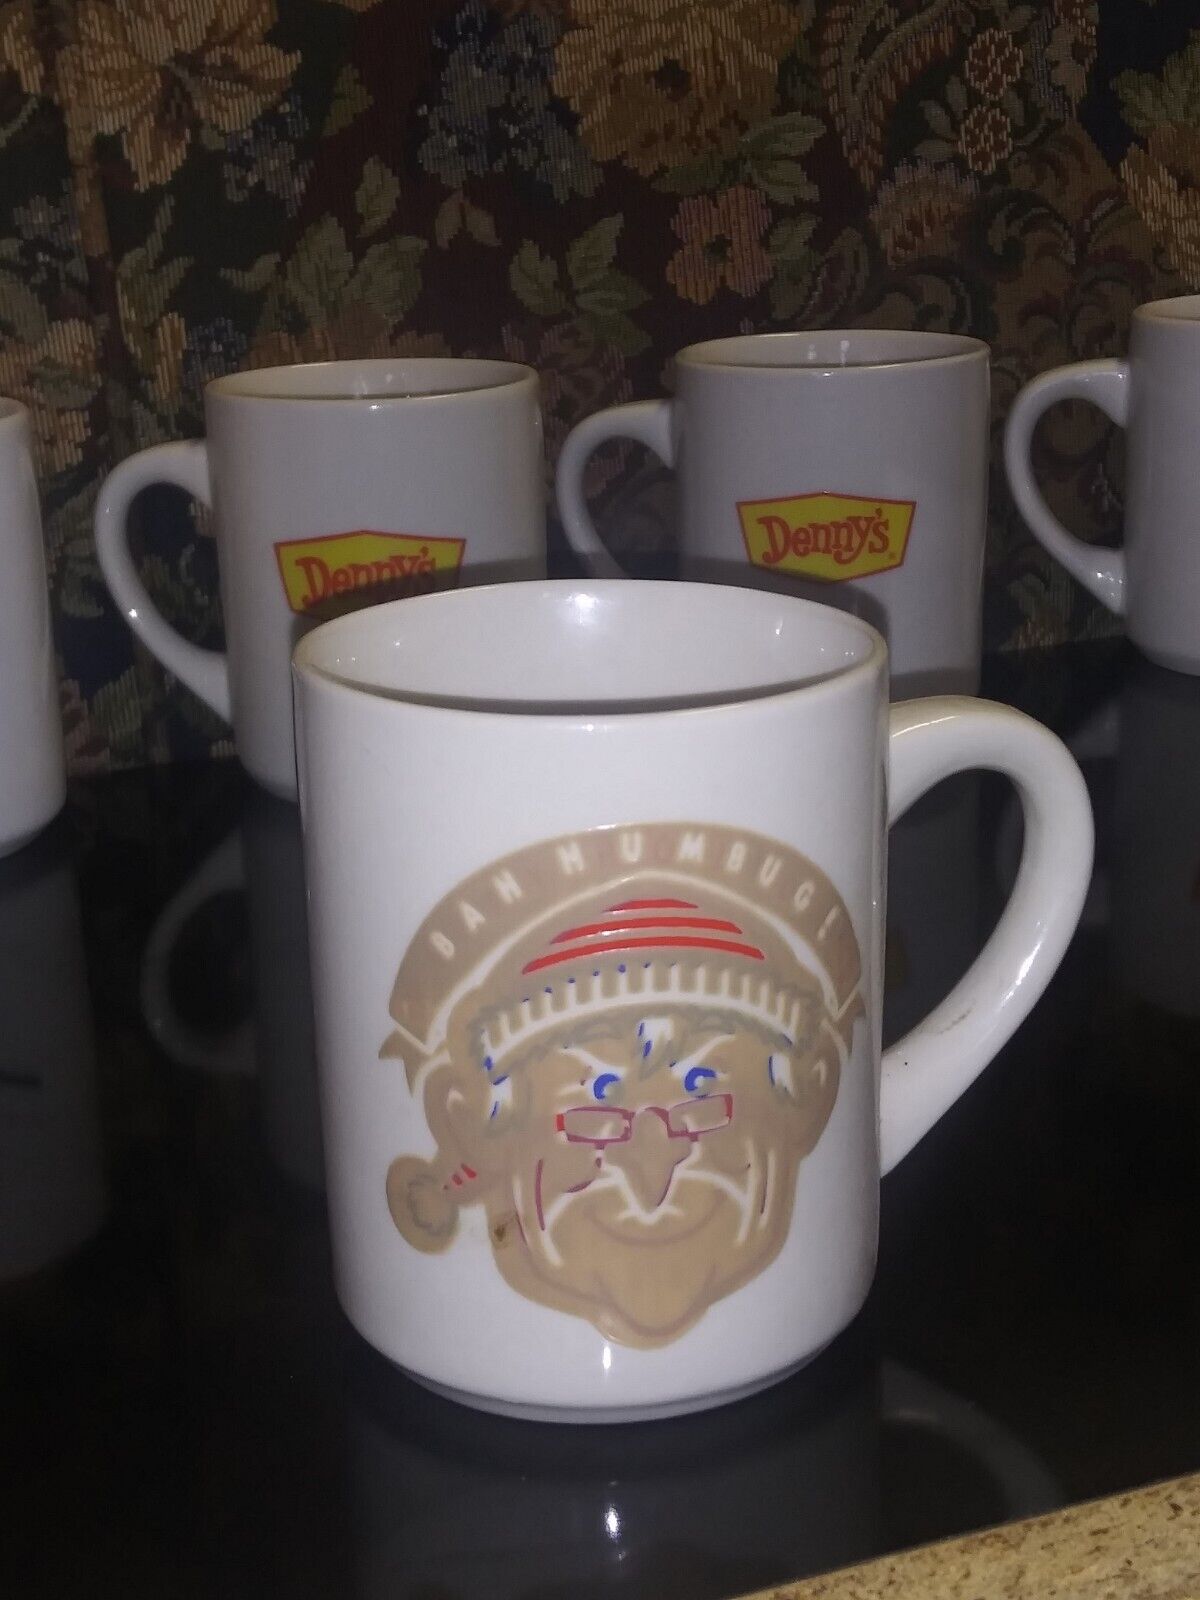 vintage dennys coffee cups change faces when hot coffee is poured in